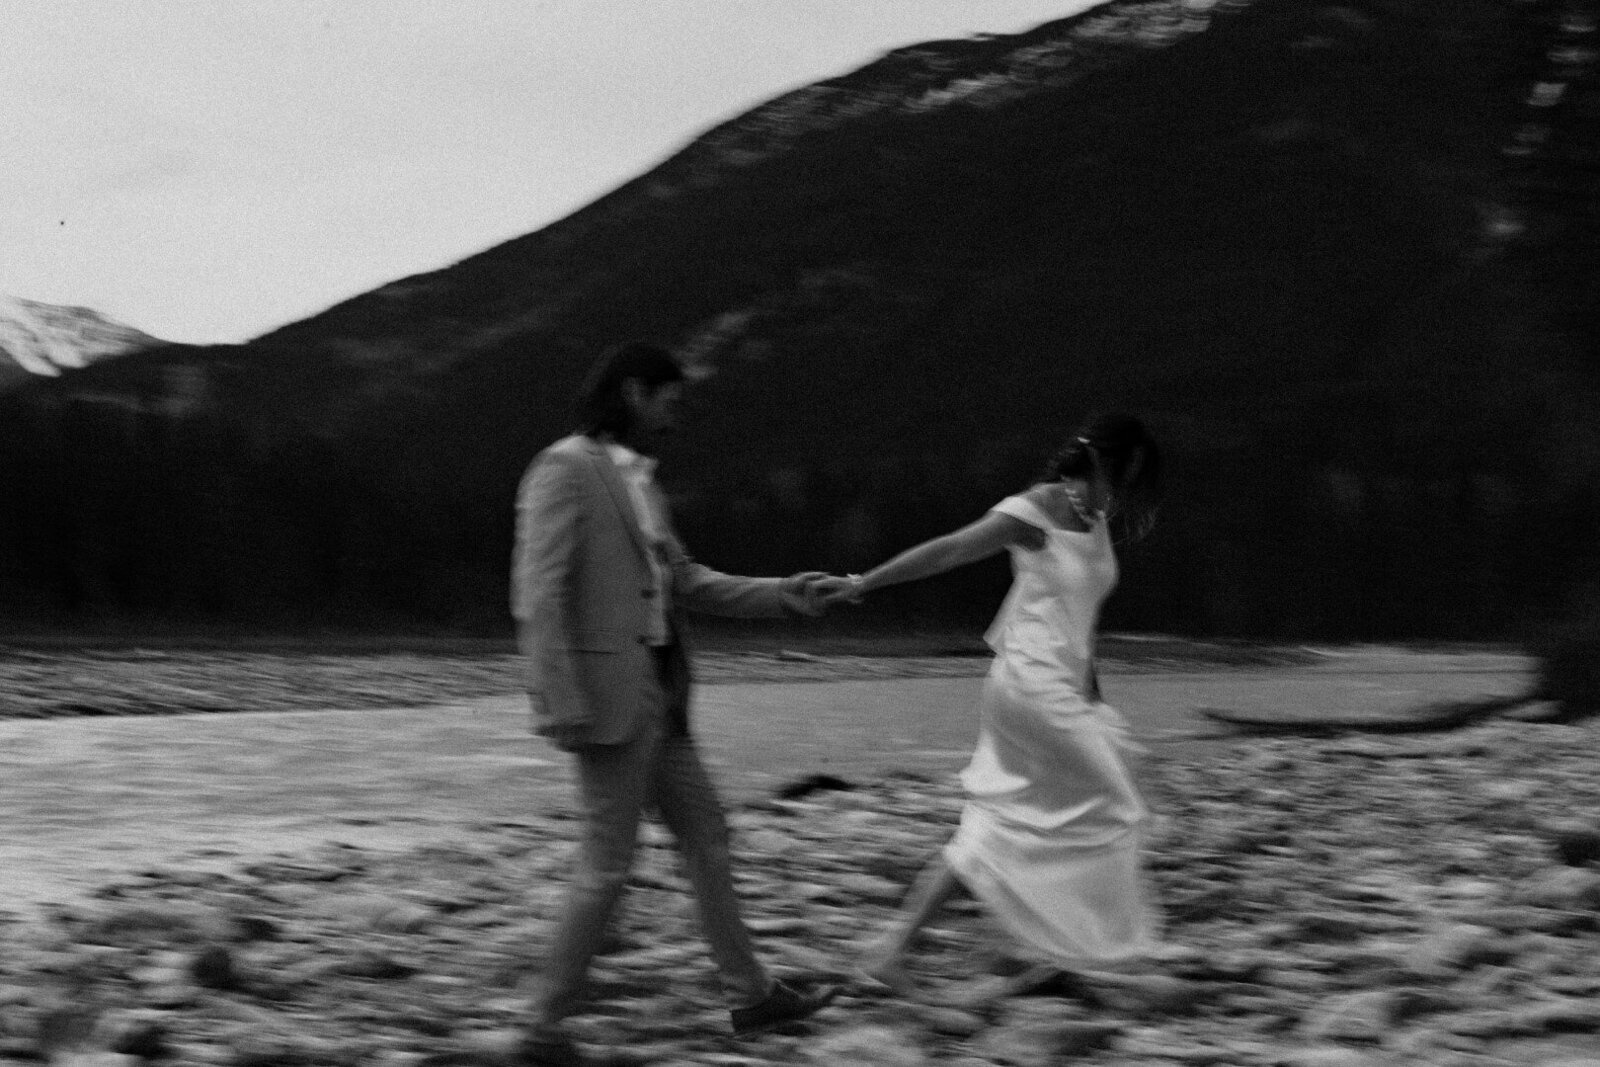 bride and groom walking on rocks by a river in canada holding hands